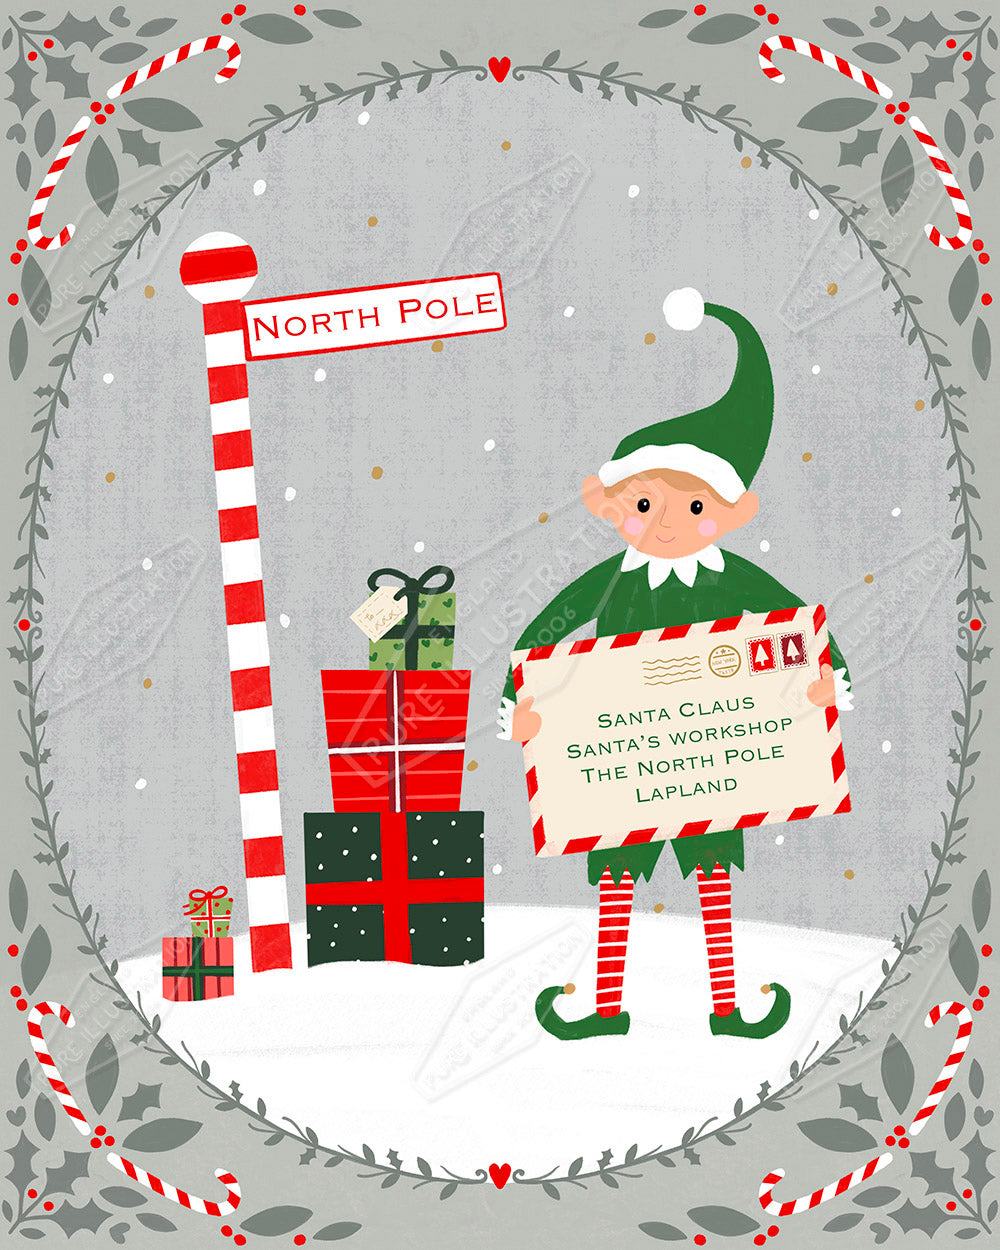 Elf Christmas Illustration by Sian Summerhayes for Pure Art Licensing & Surface Design Agency